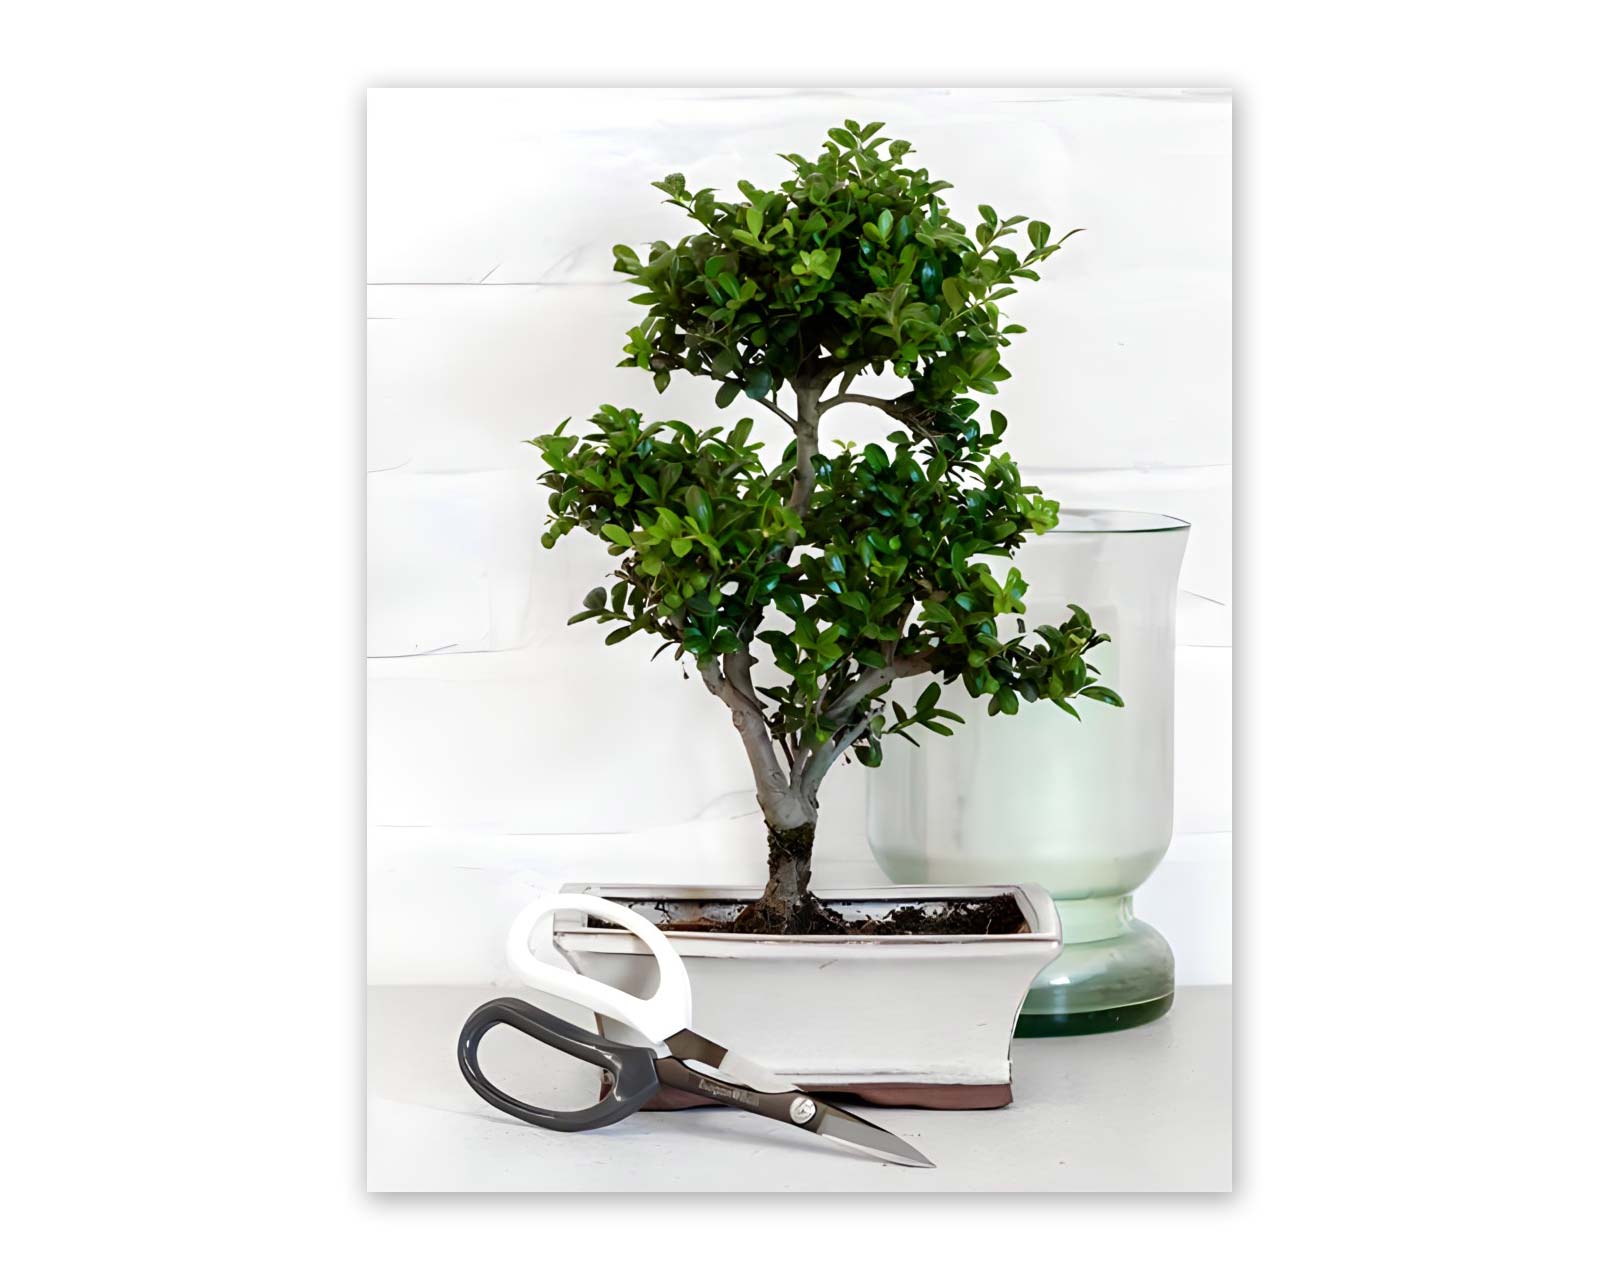 Japanese Pruning scissors - perfect for looking after Bonsai trees and indoor plants